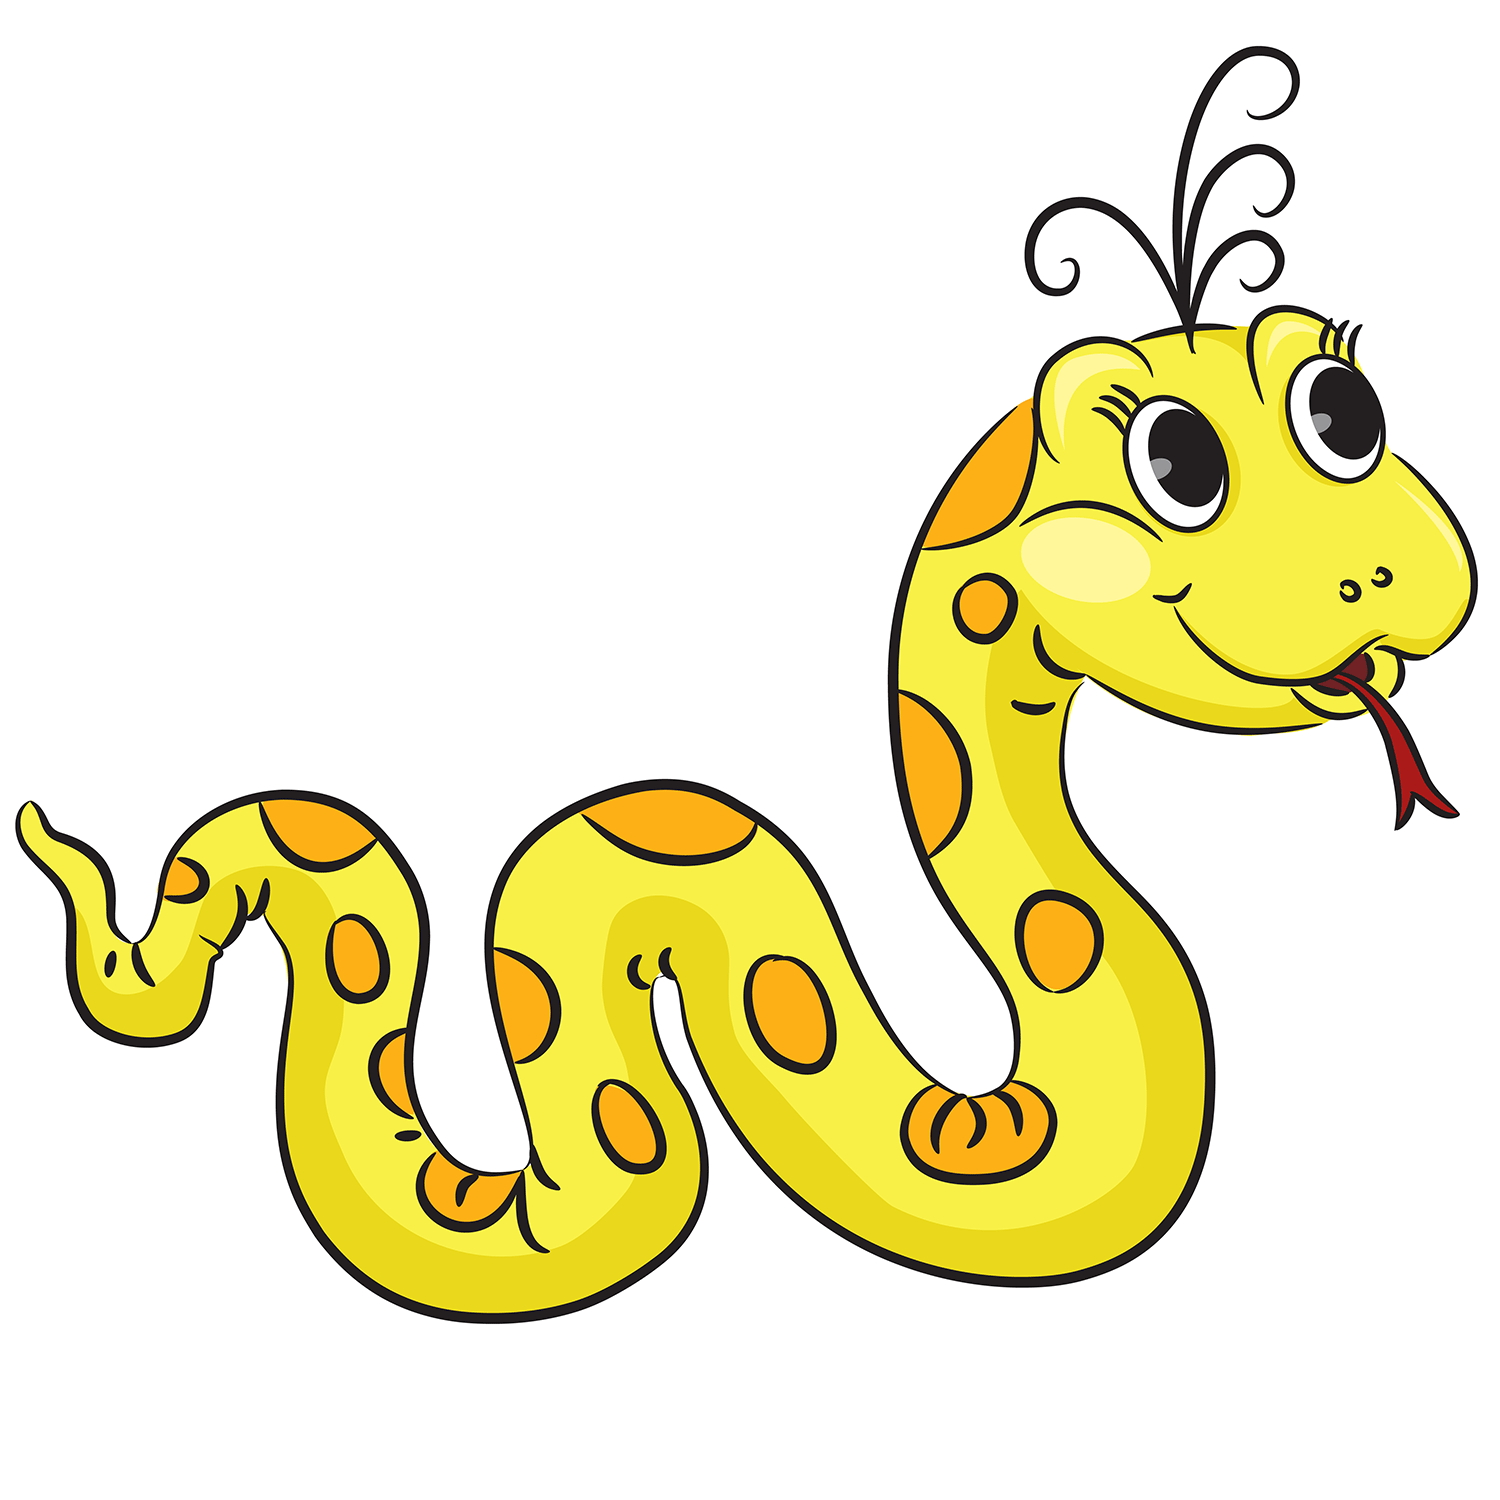 Cute Snake Clipart   Clipart Panda   Free Clipart Images